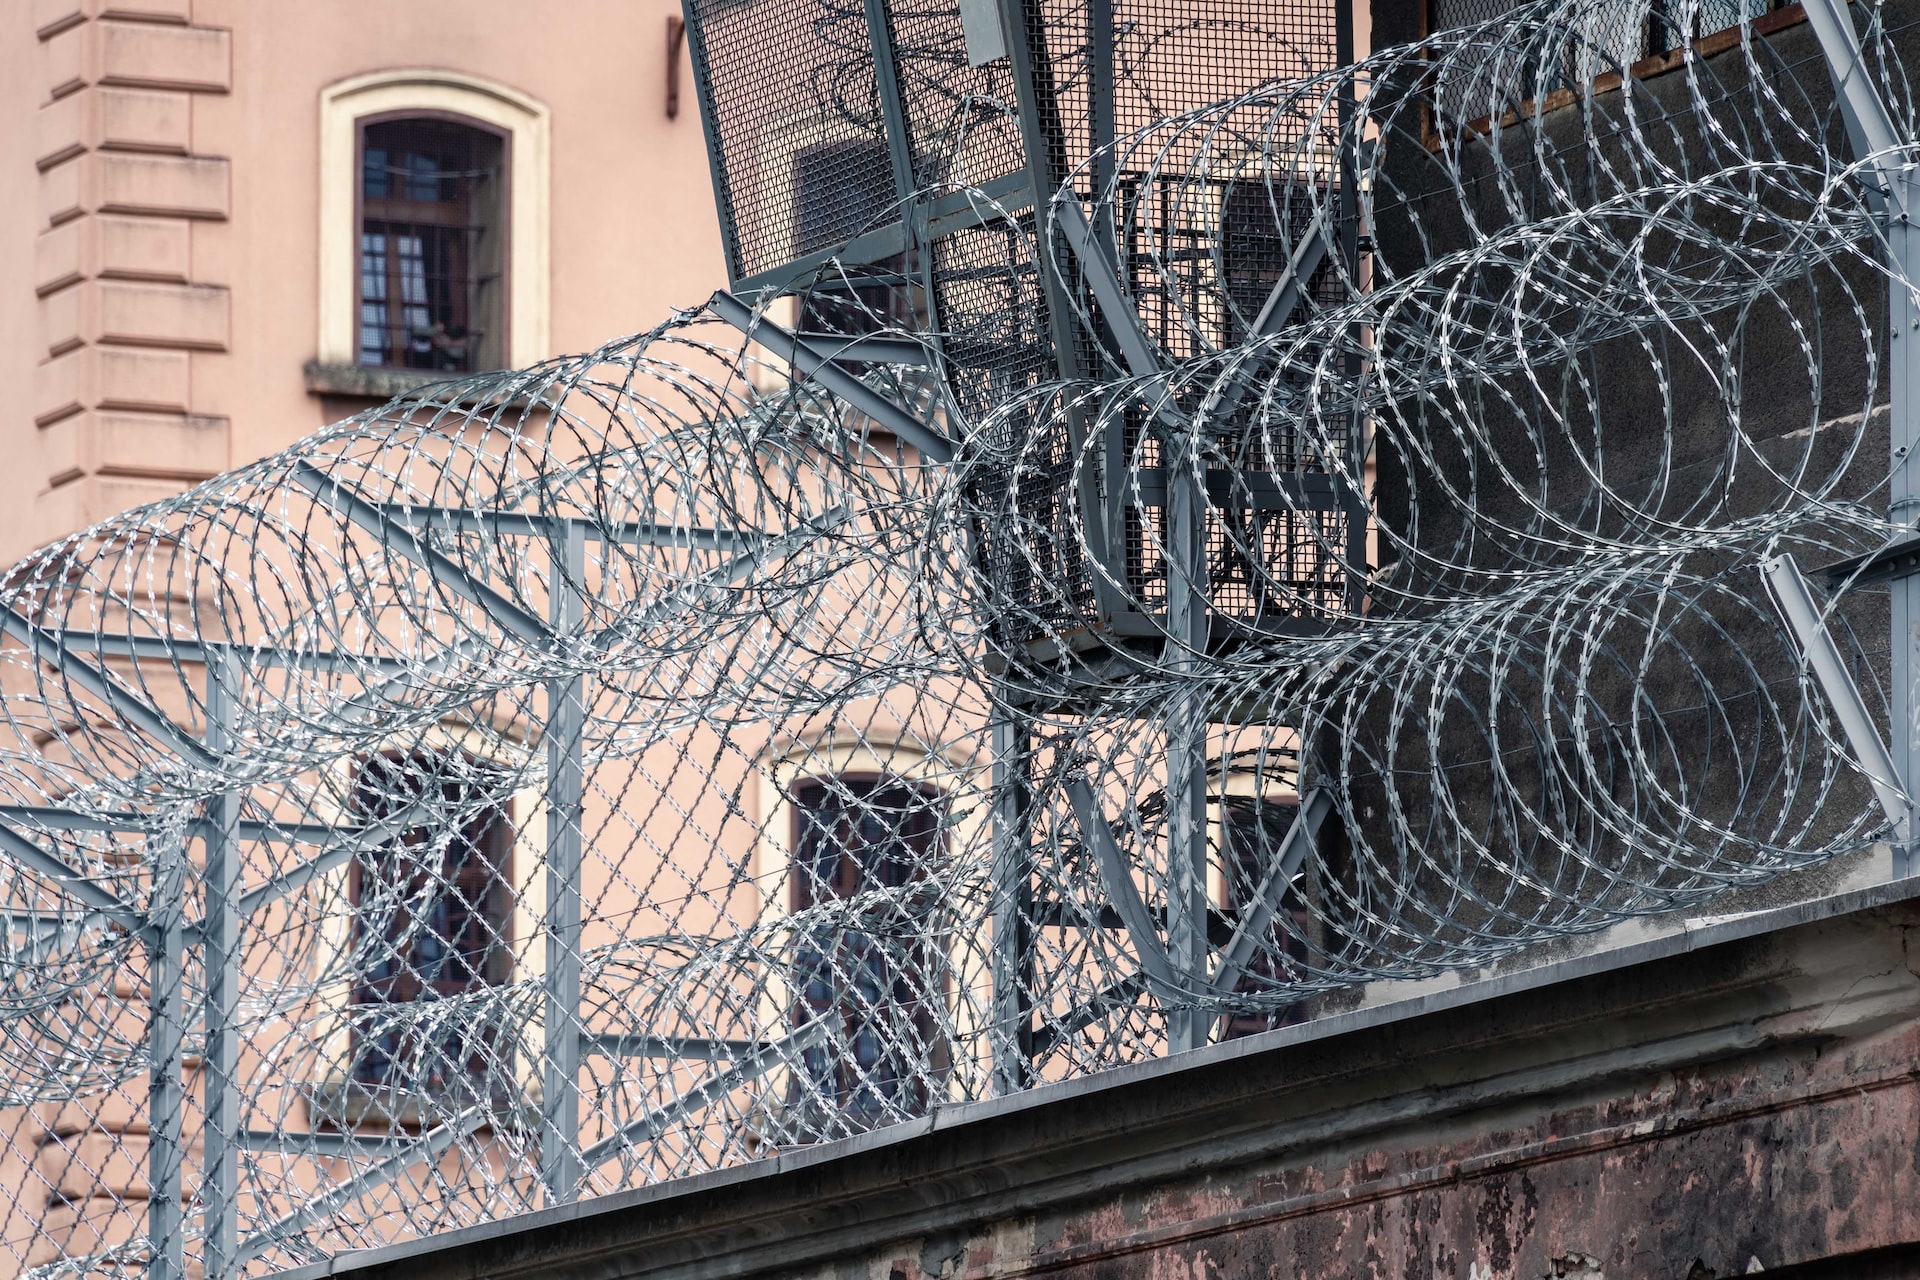 prison with barbed wire - capital punishment in Arizona